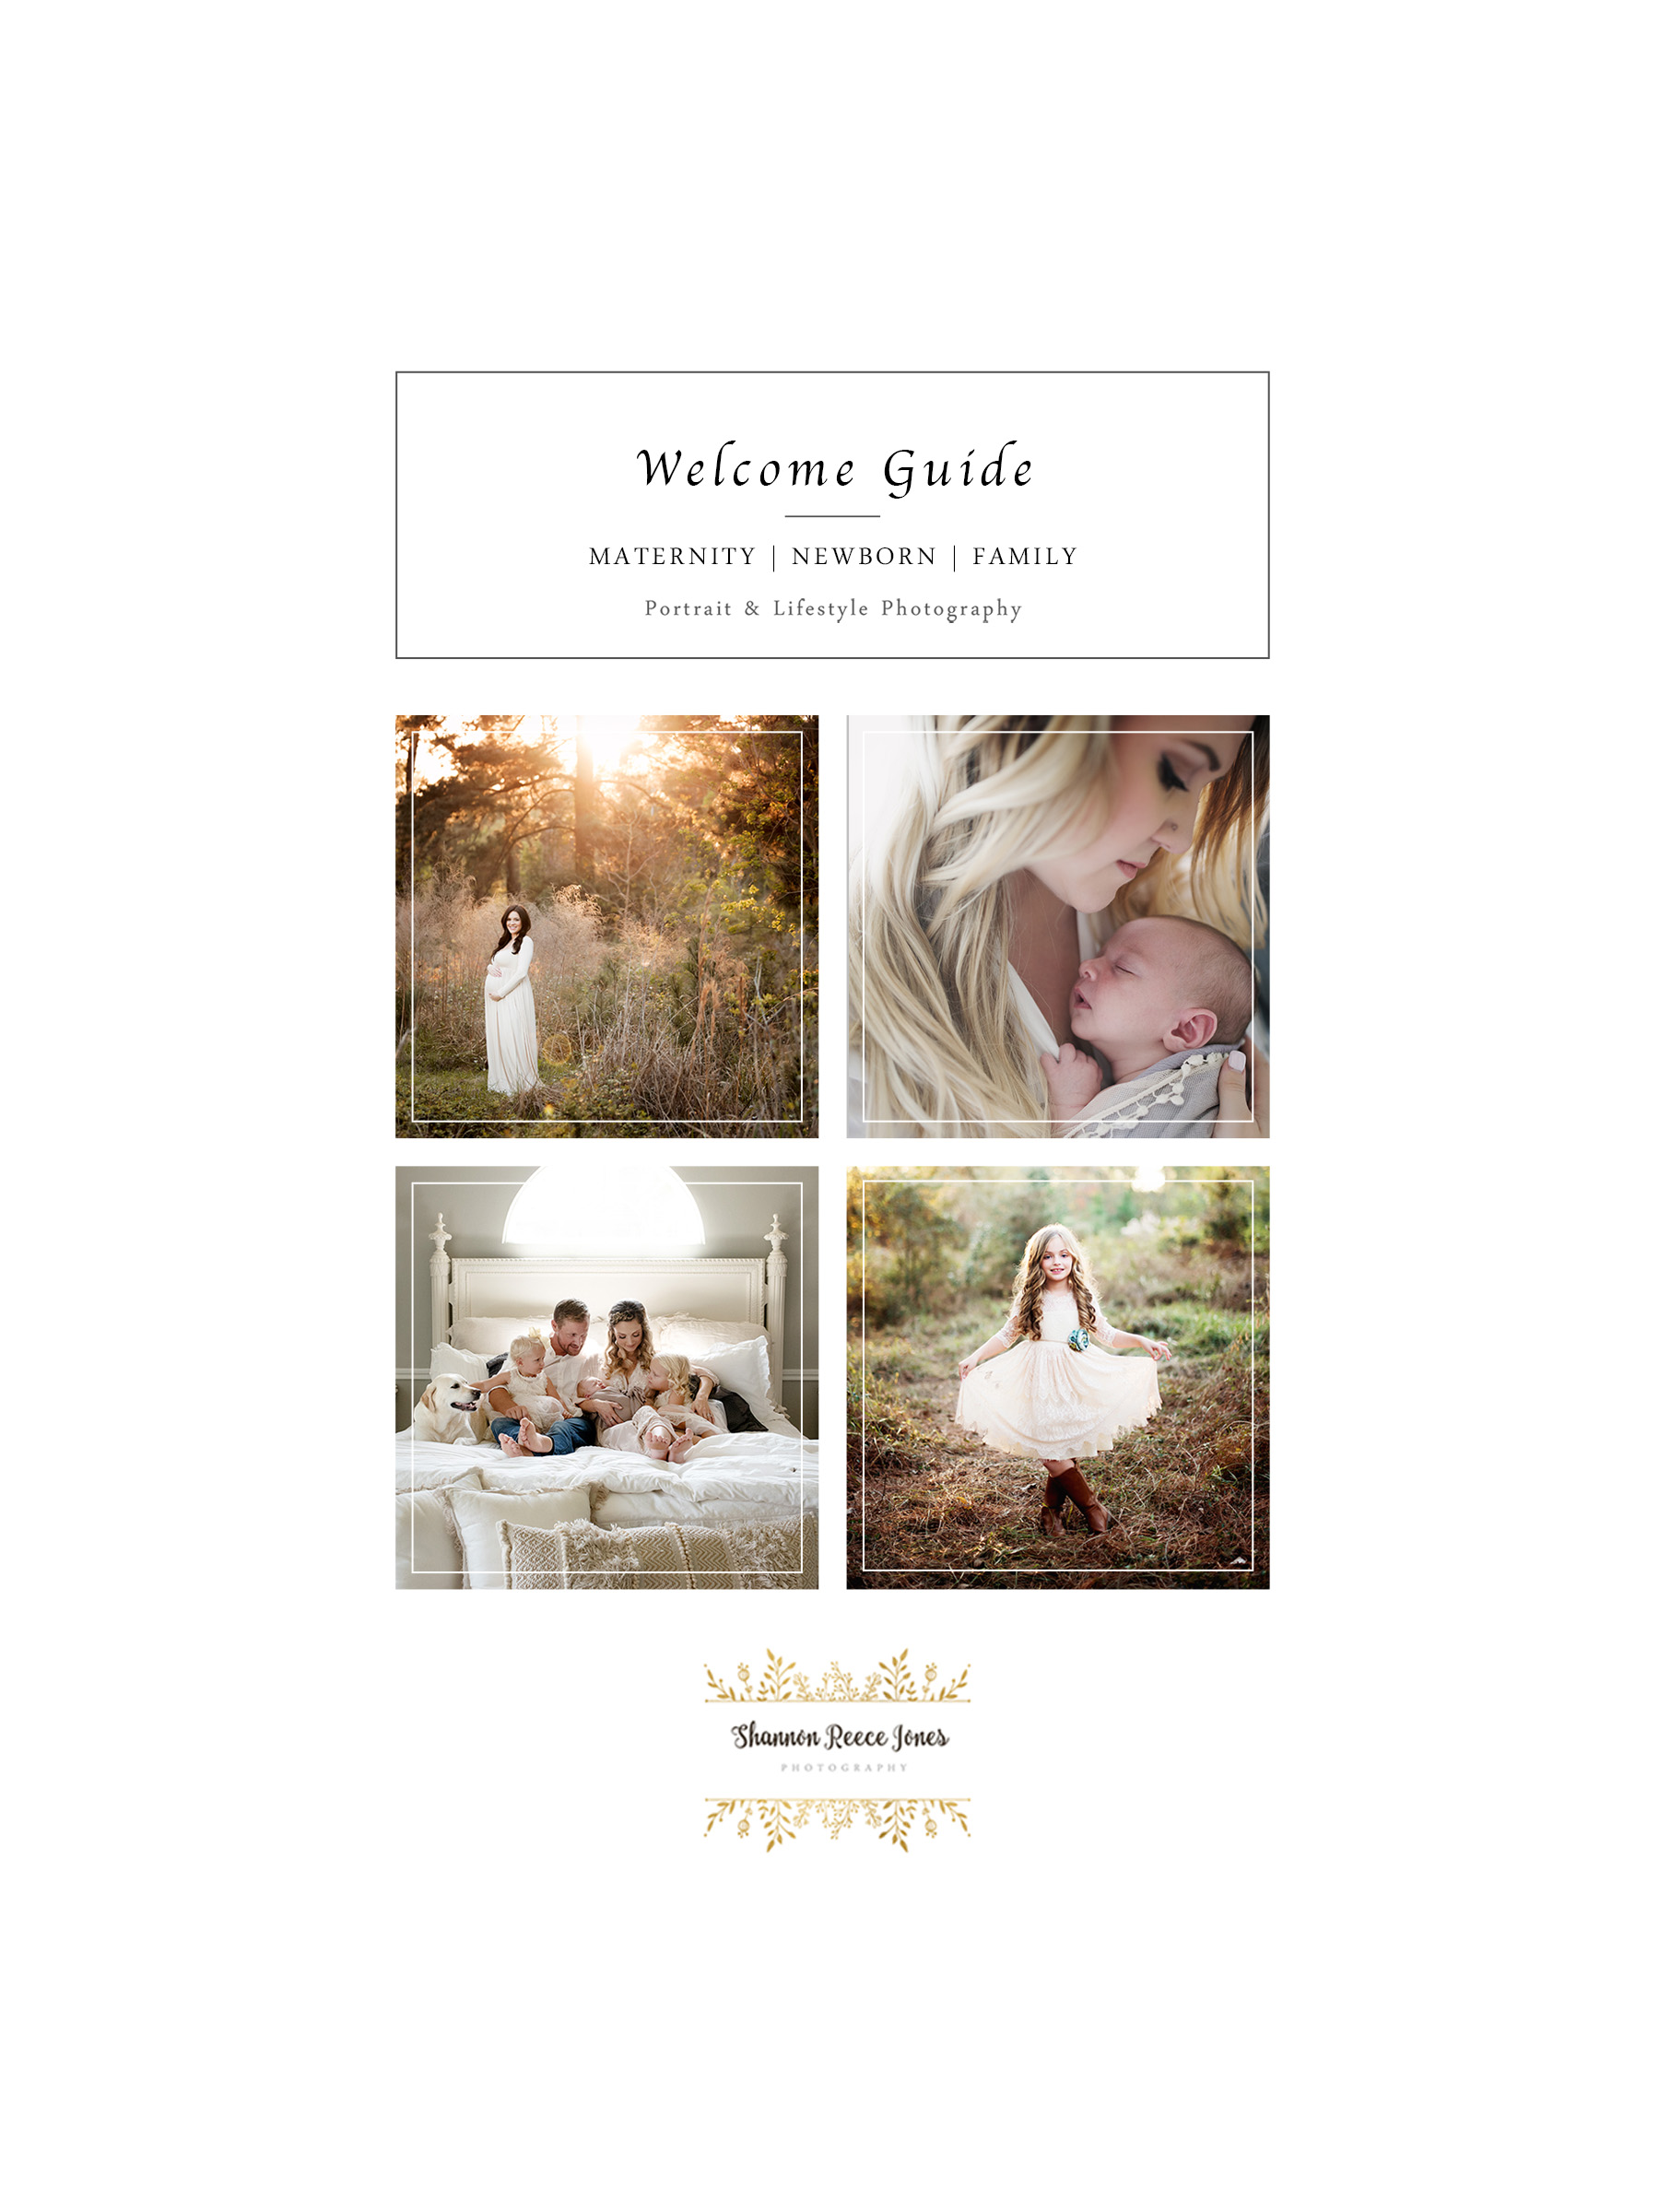 shannon reece jones photography front cover of welcome guide